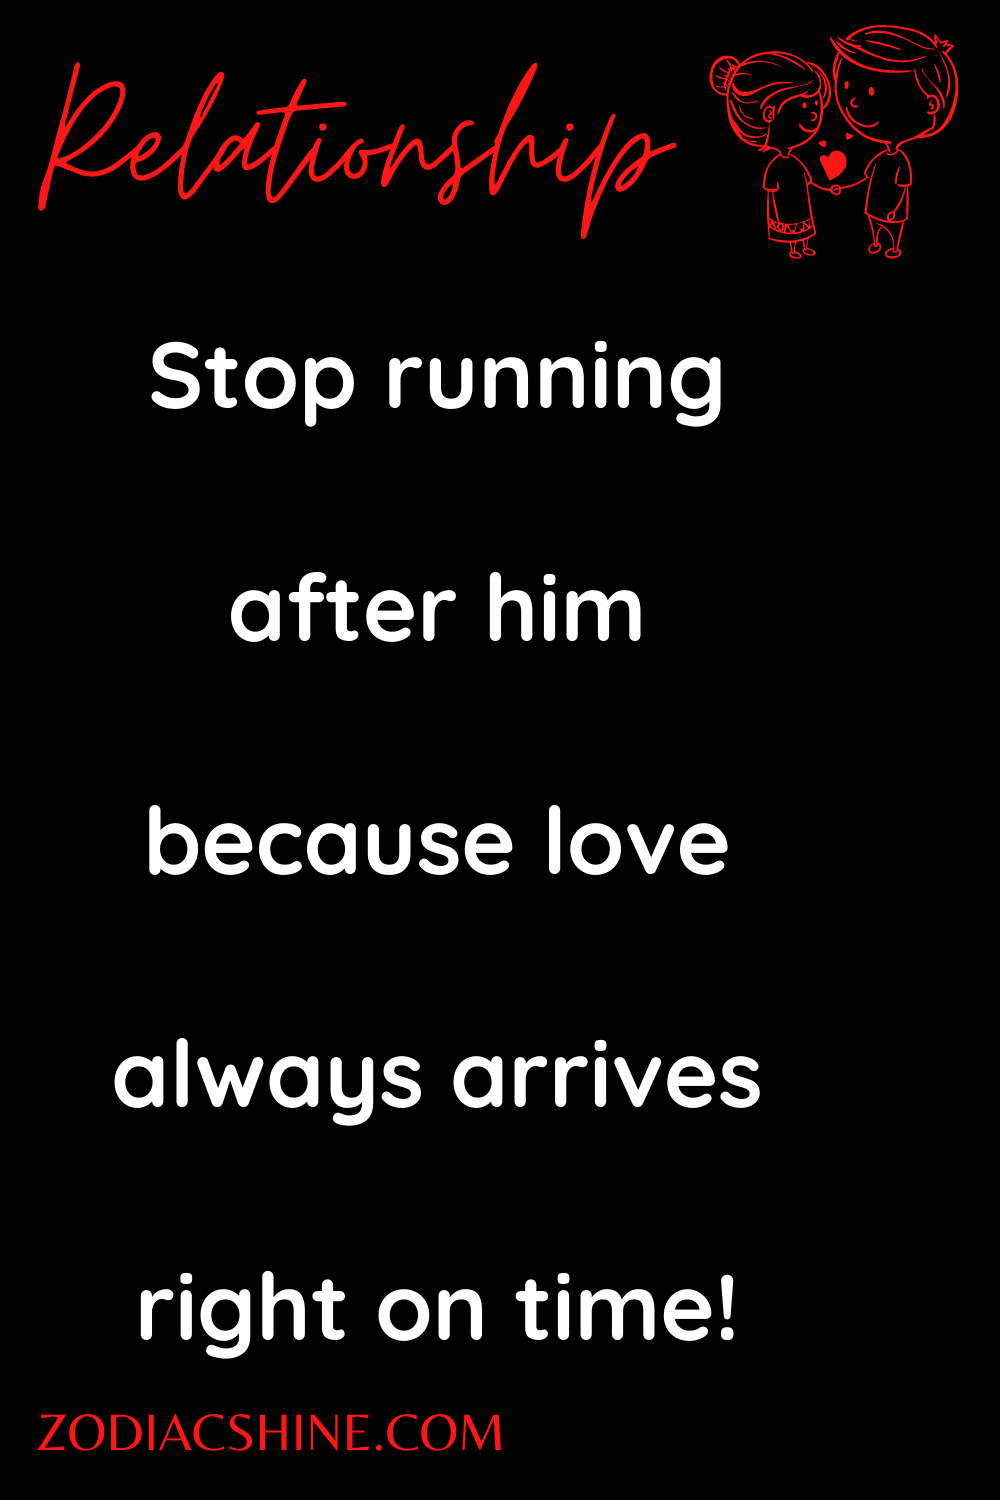 Stop running after him because love always arrives right on time!